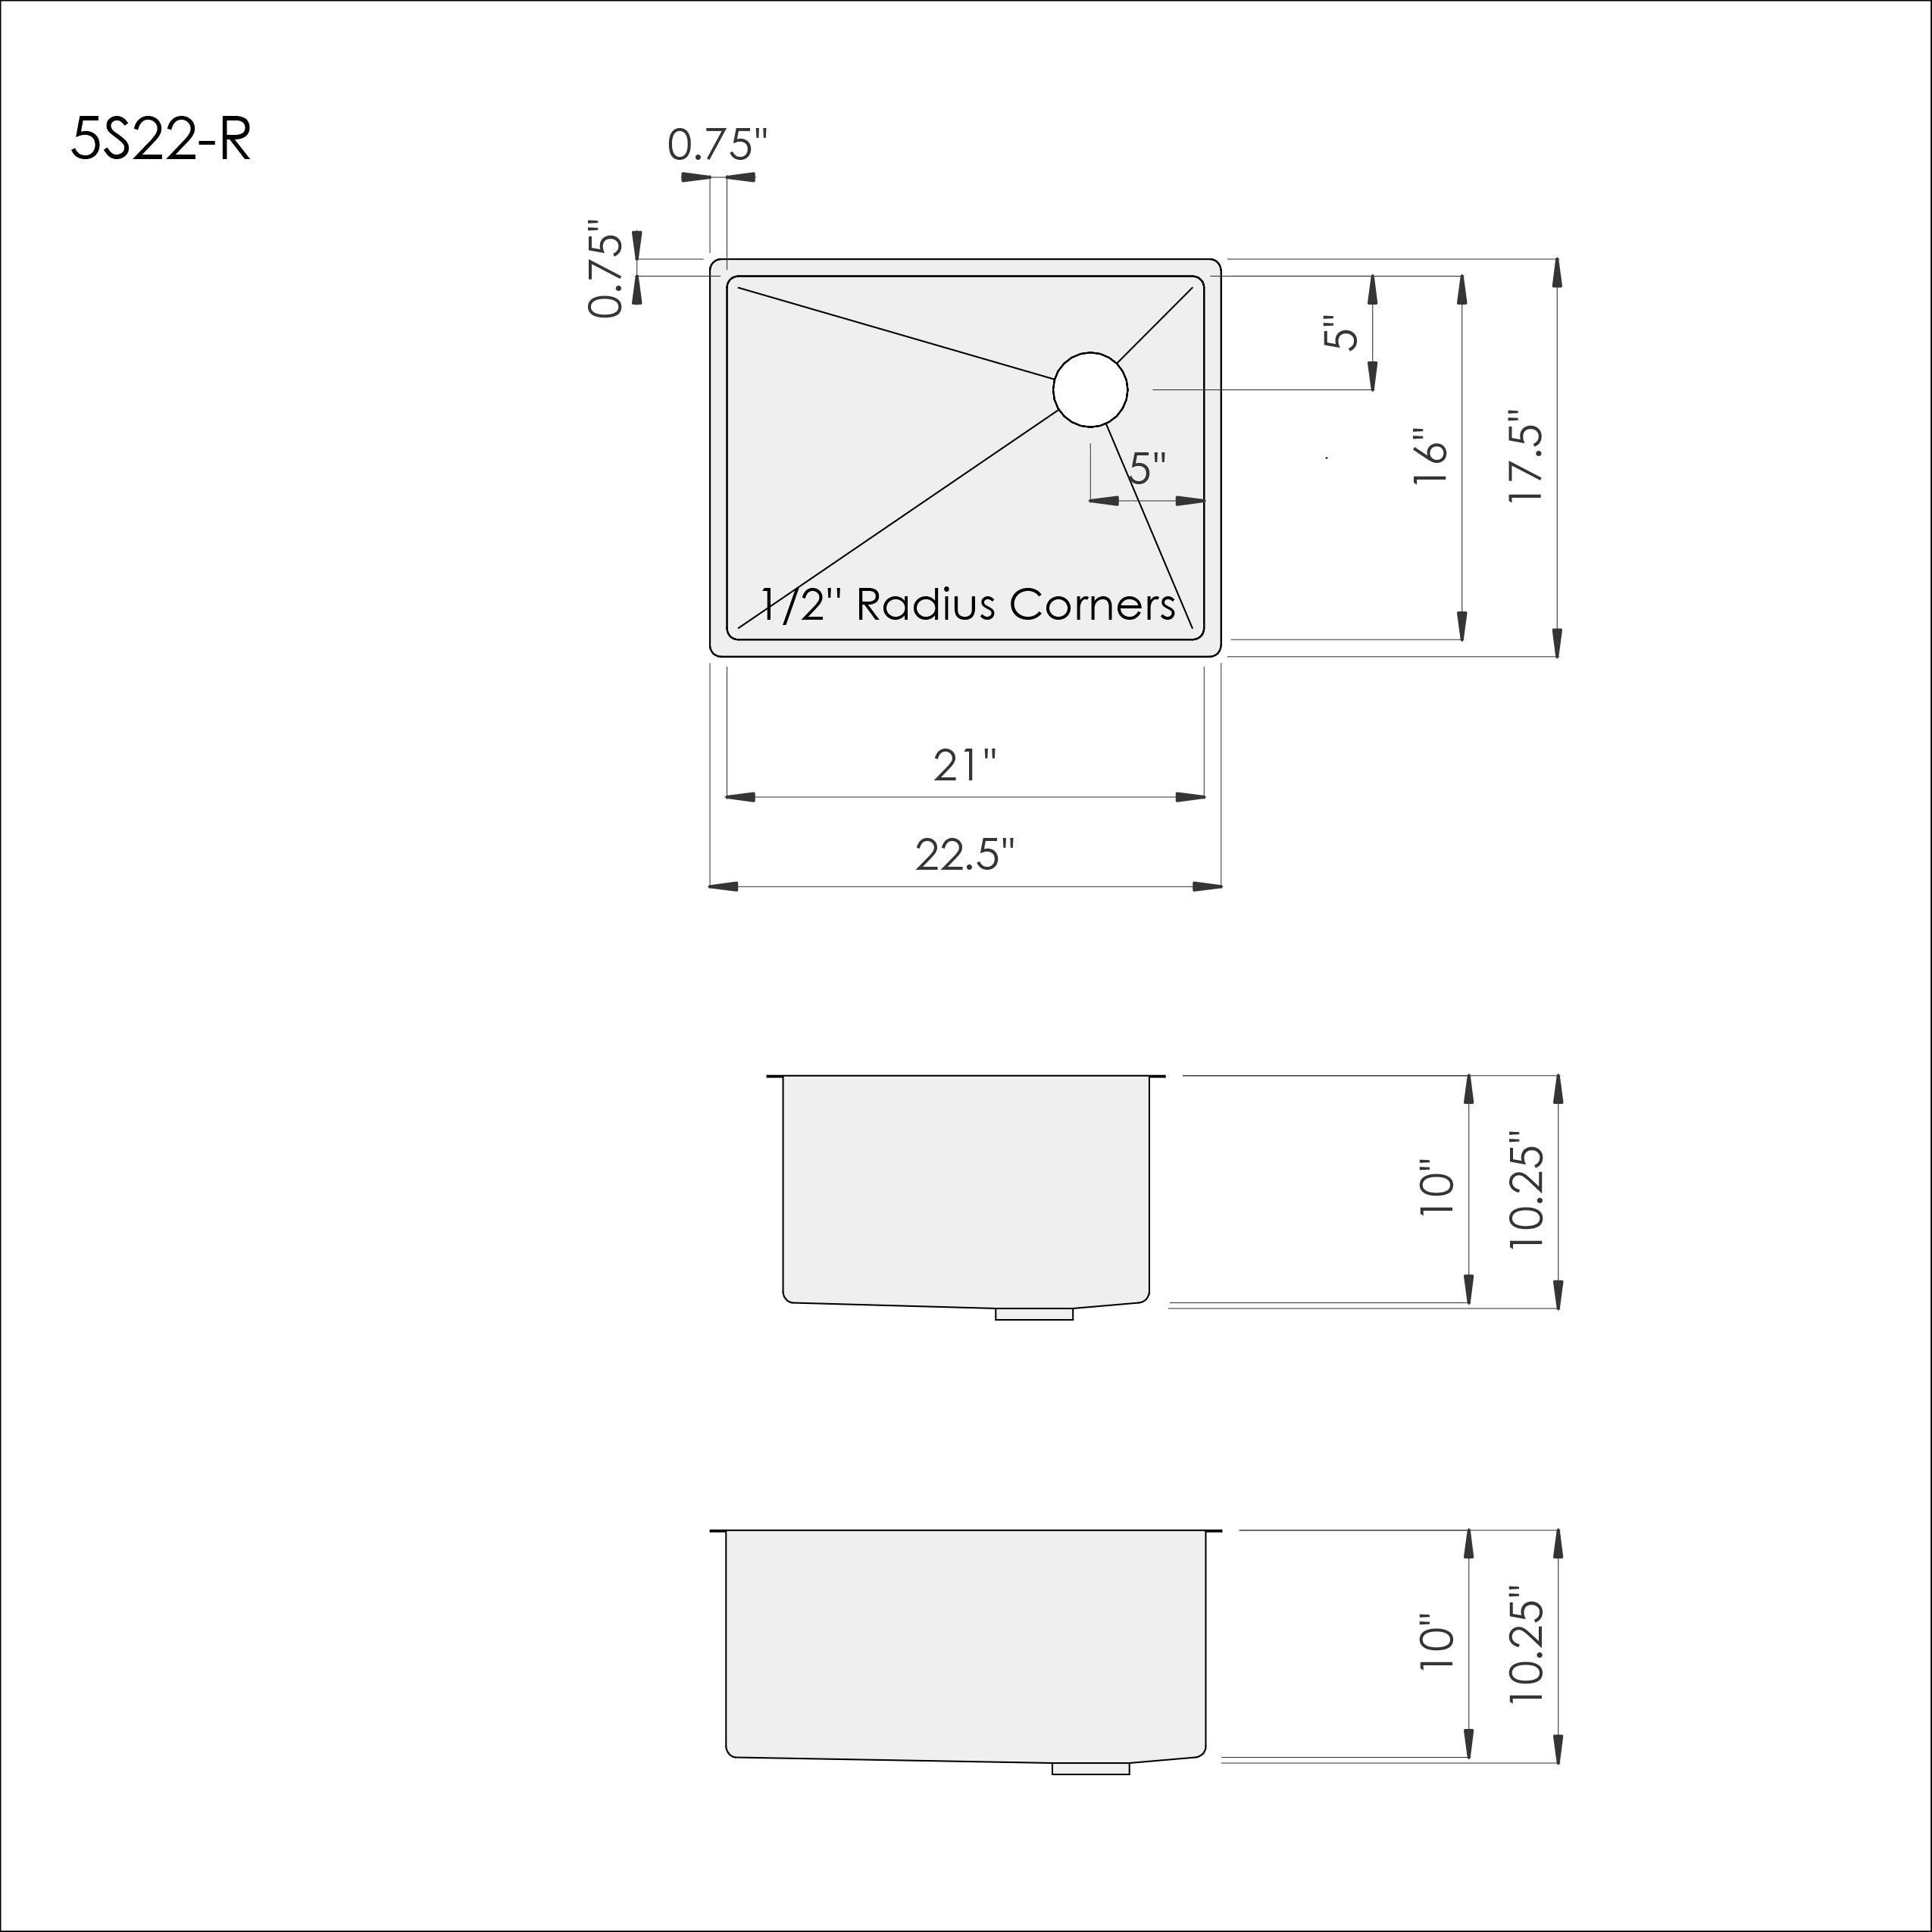 Dimensions of 22" stainless steel undermount, single bowl kitchen sink, offset drain right, half inch radius corners